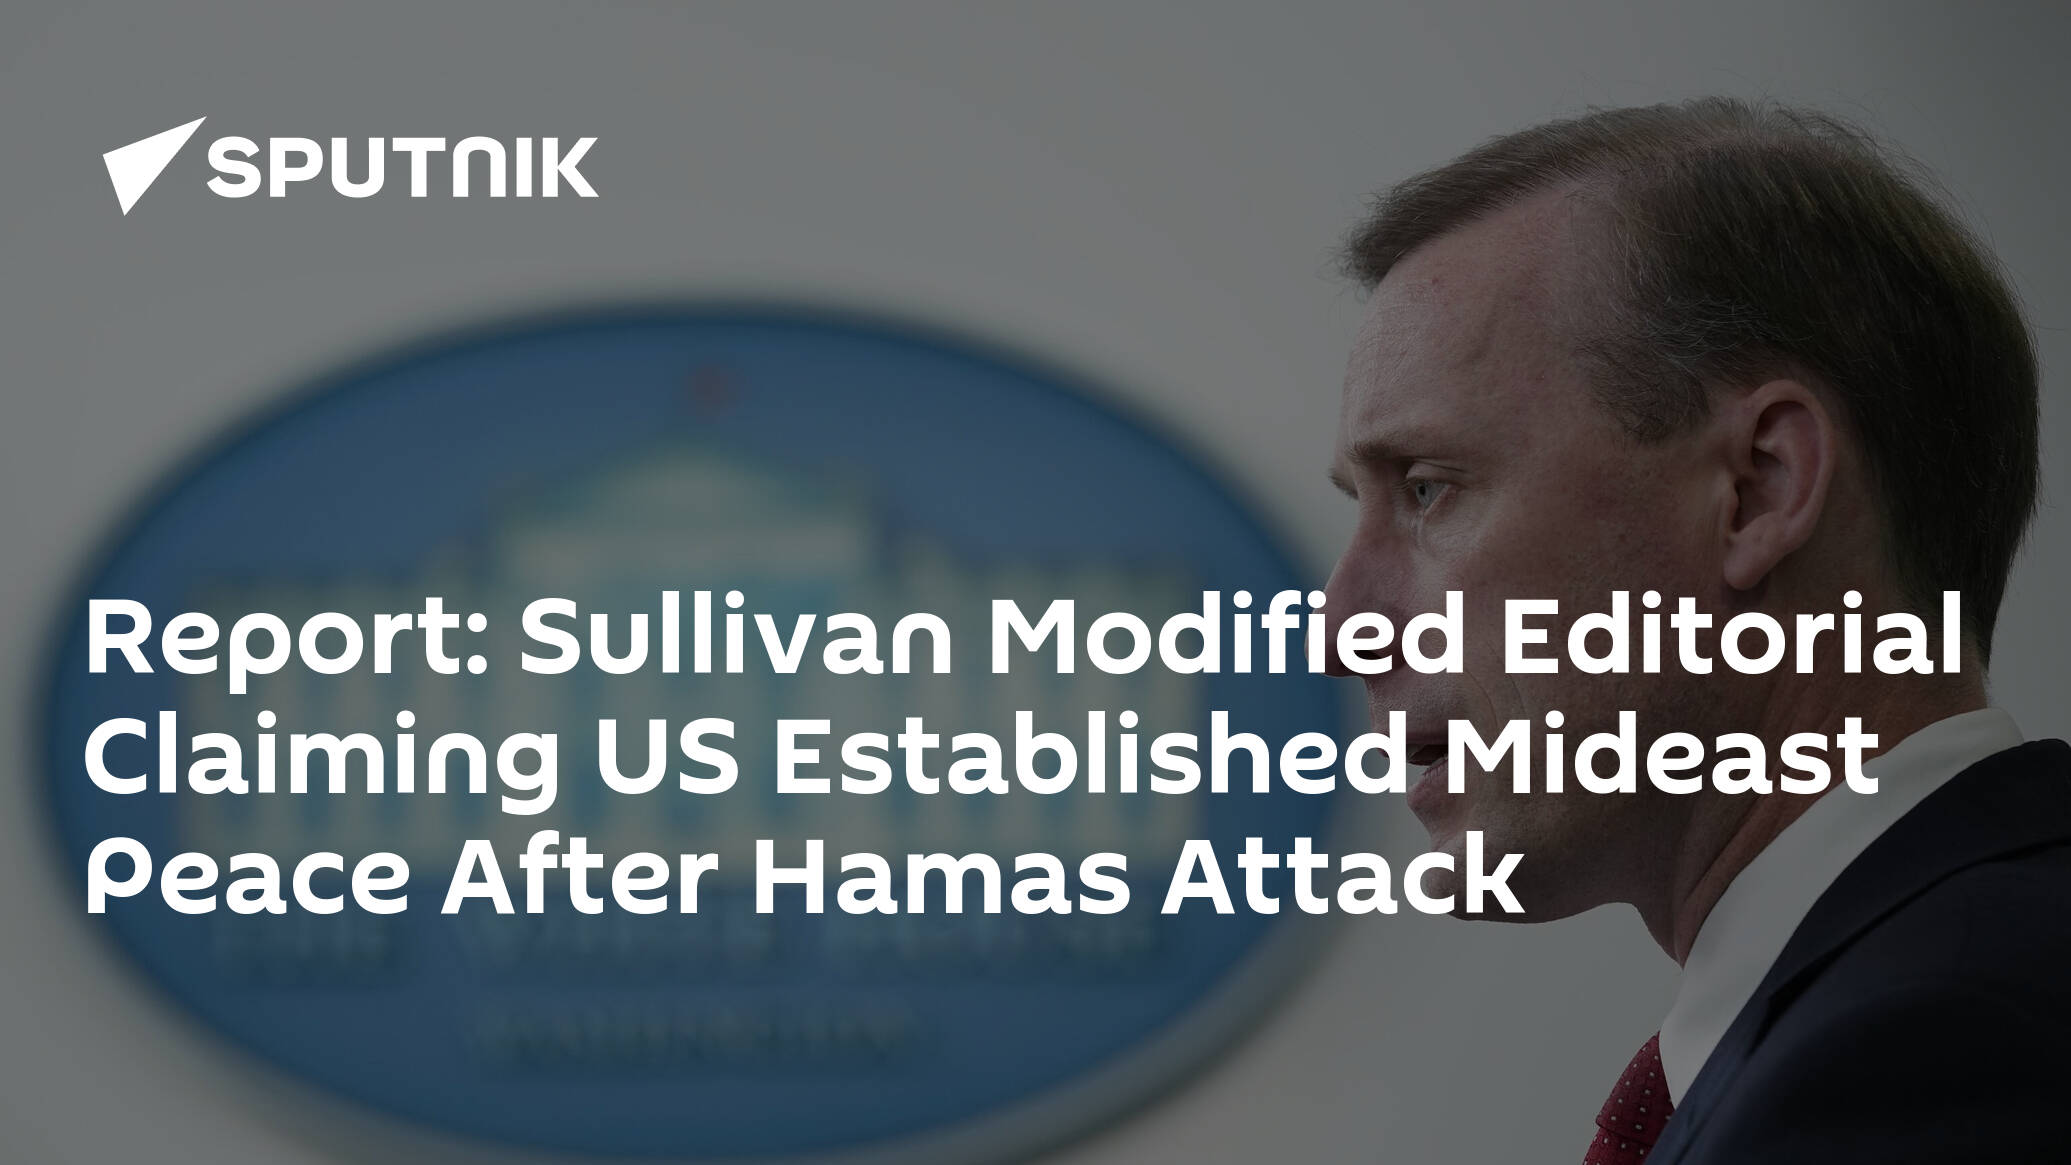 Report: Sullivan Modified Editorial Claiming US Established Mideast Peace After Hamas Attack